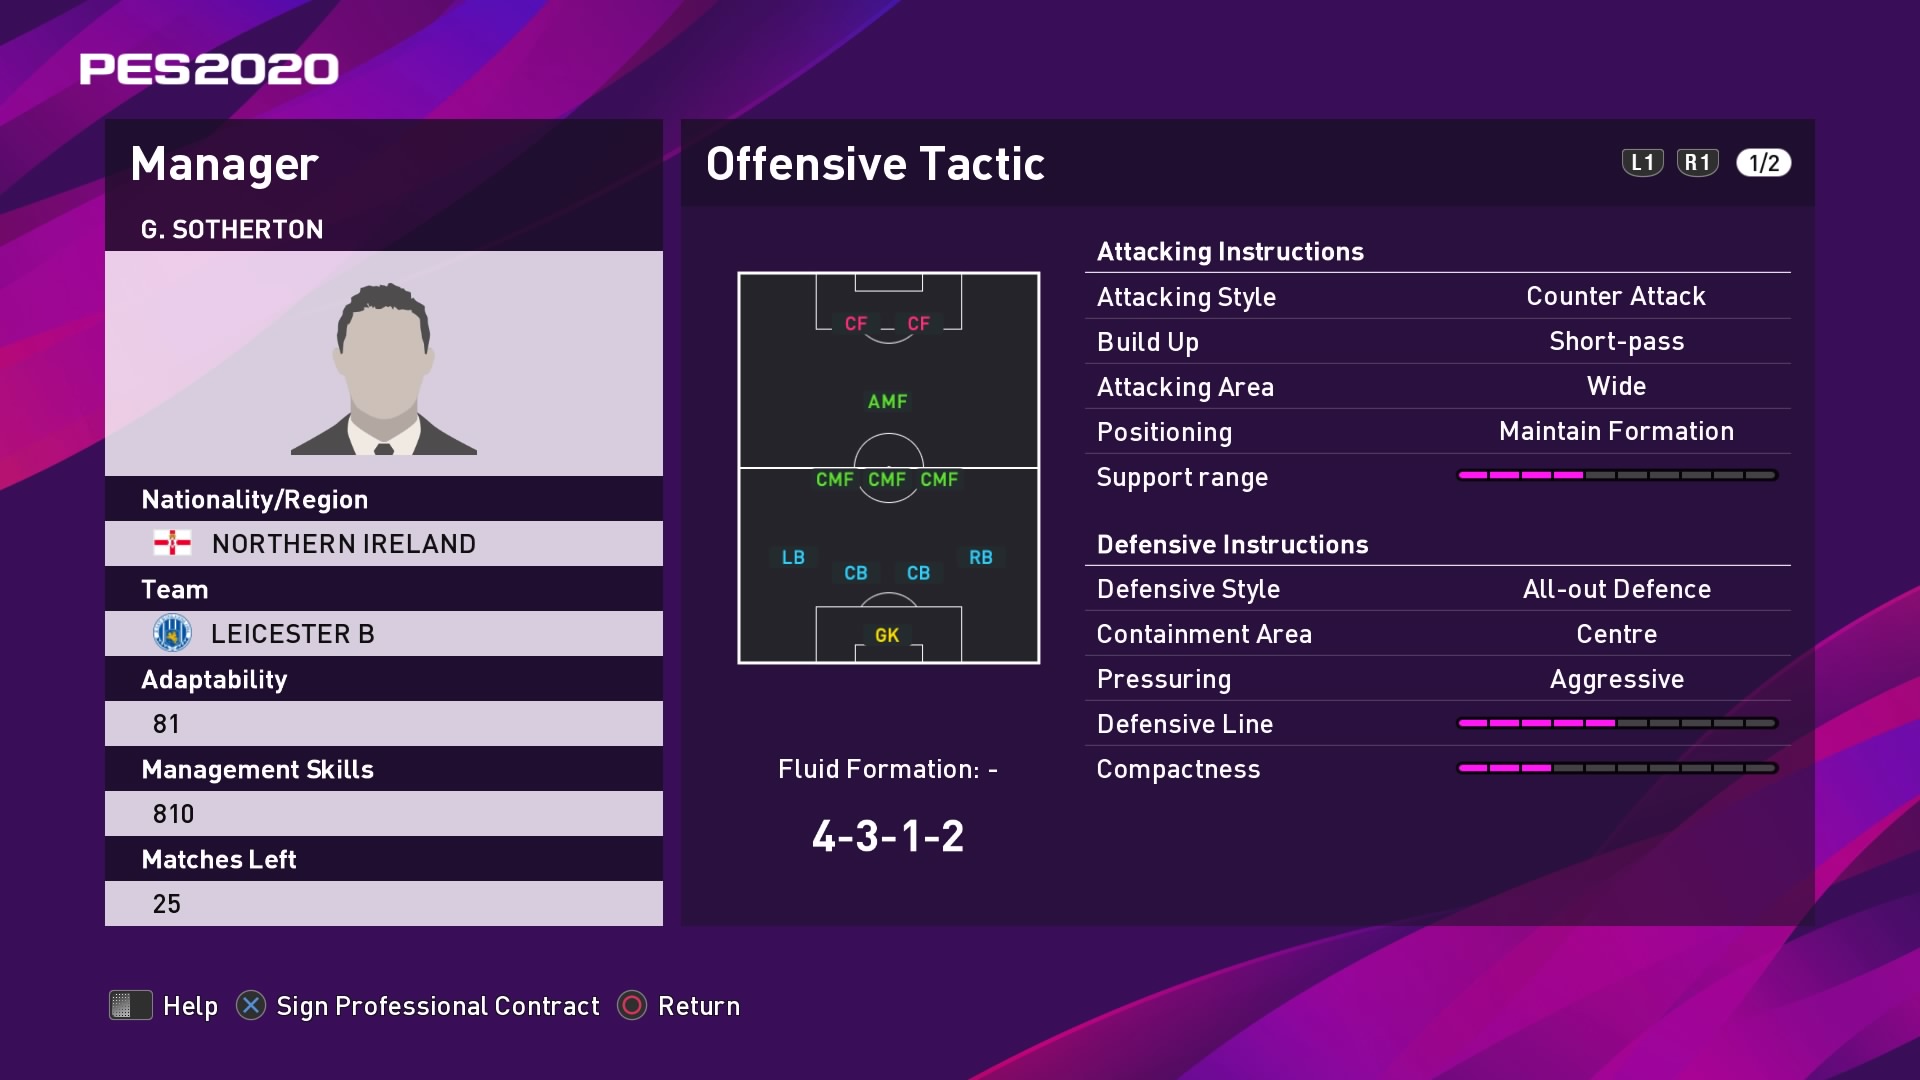 G. Sotherton (Brendan Rodgers) Offensive Tactic in PES 2020 myClub